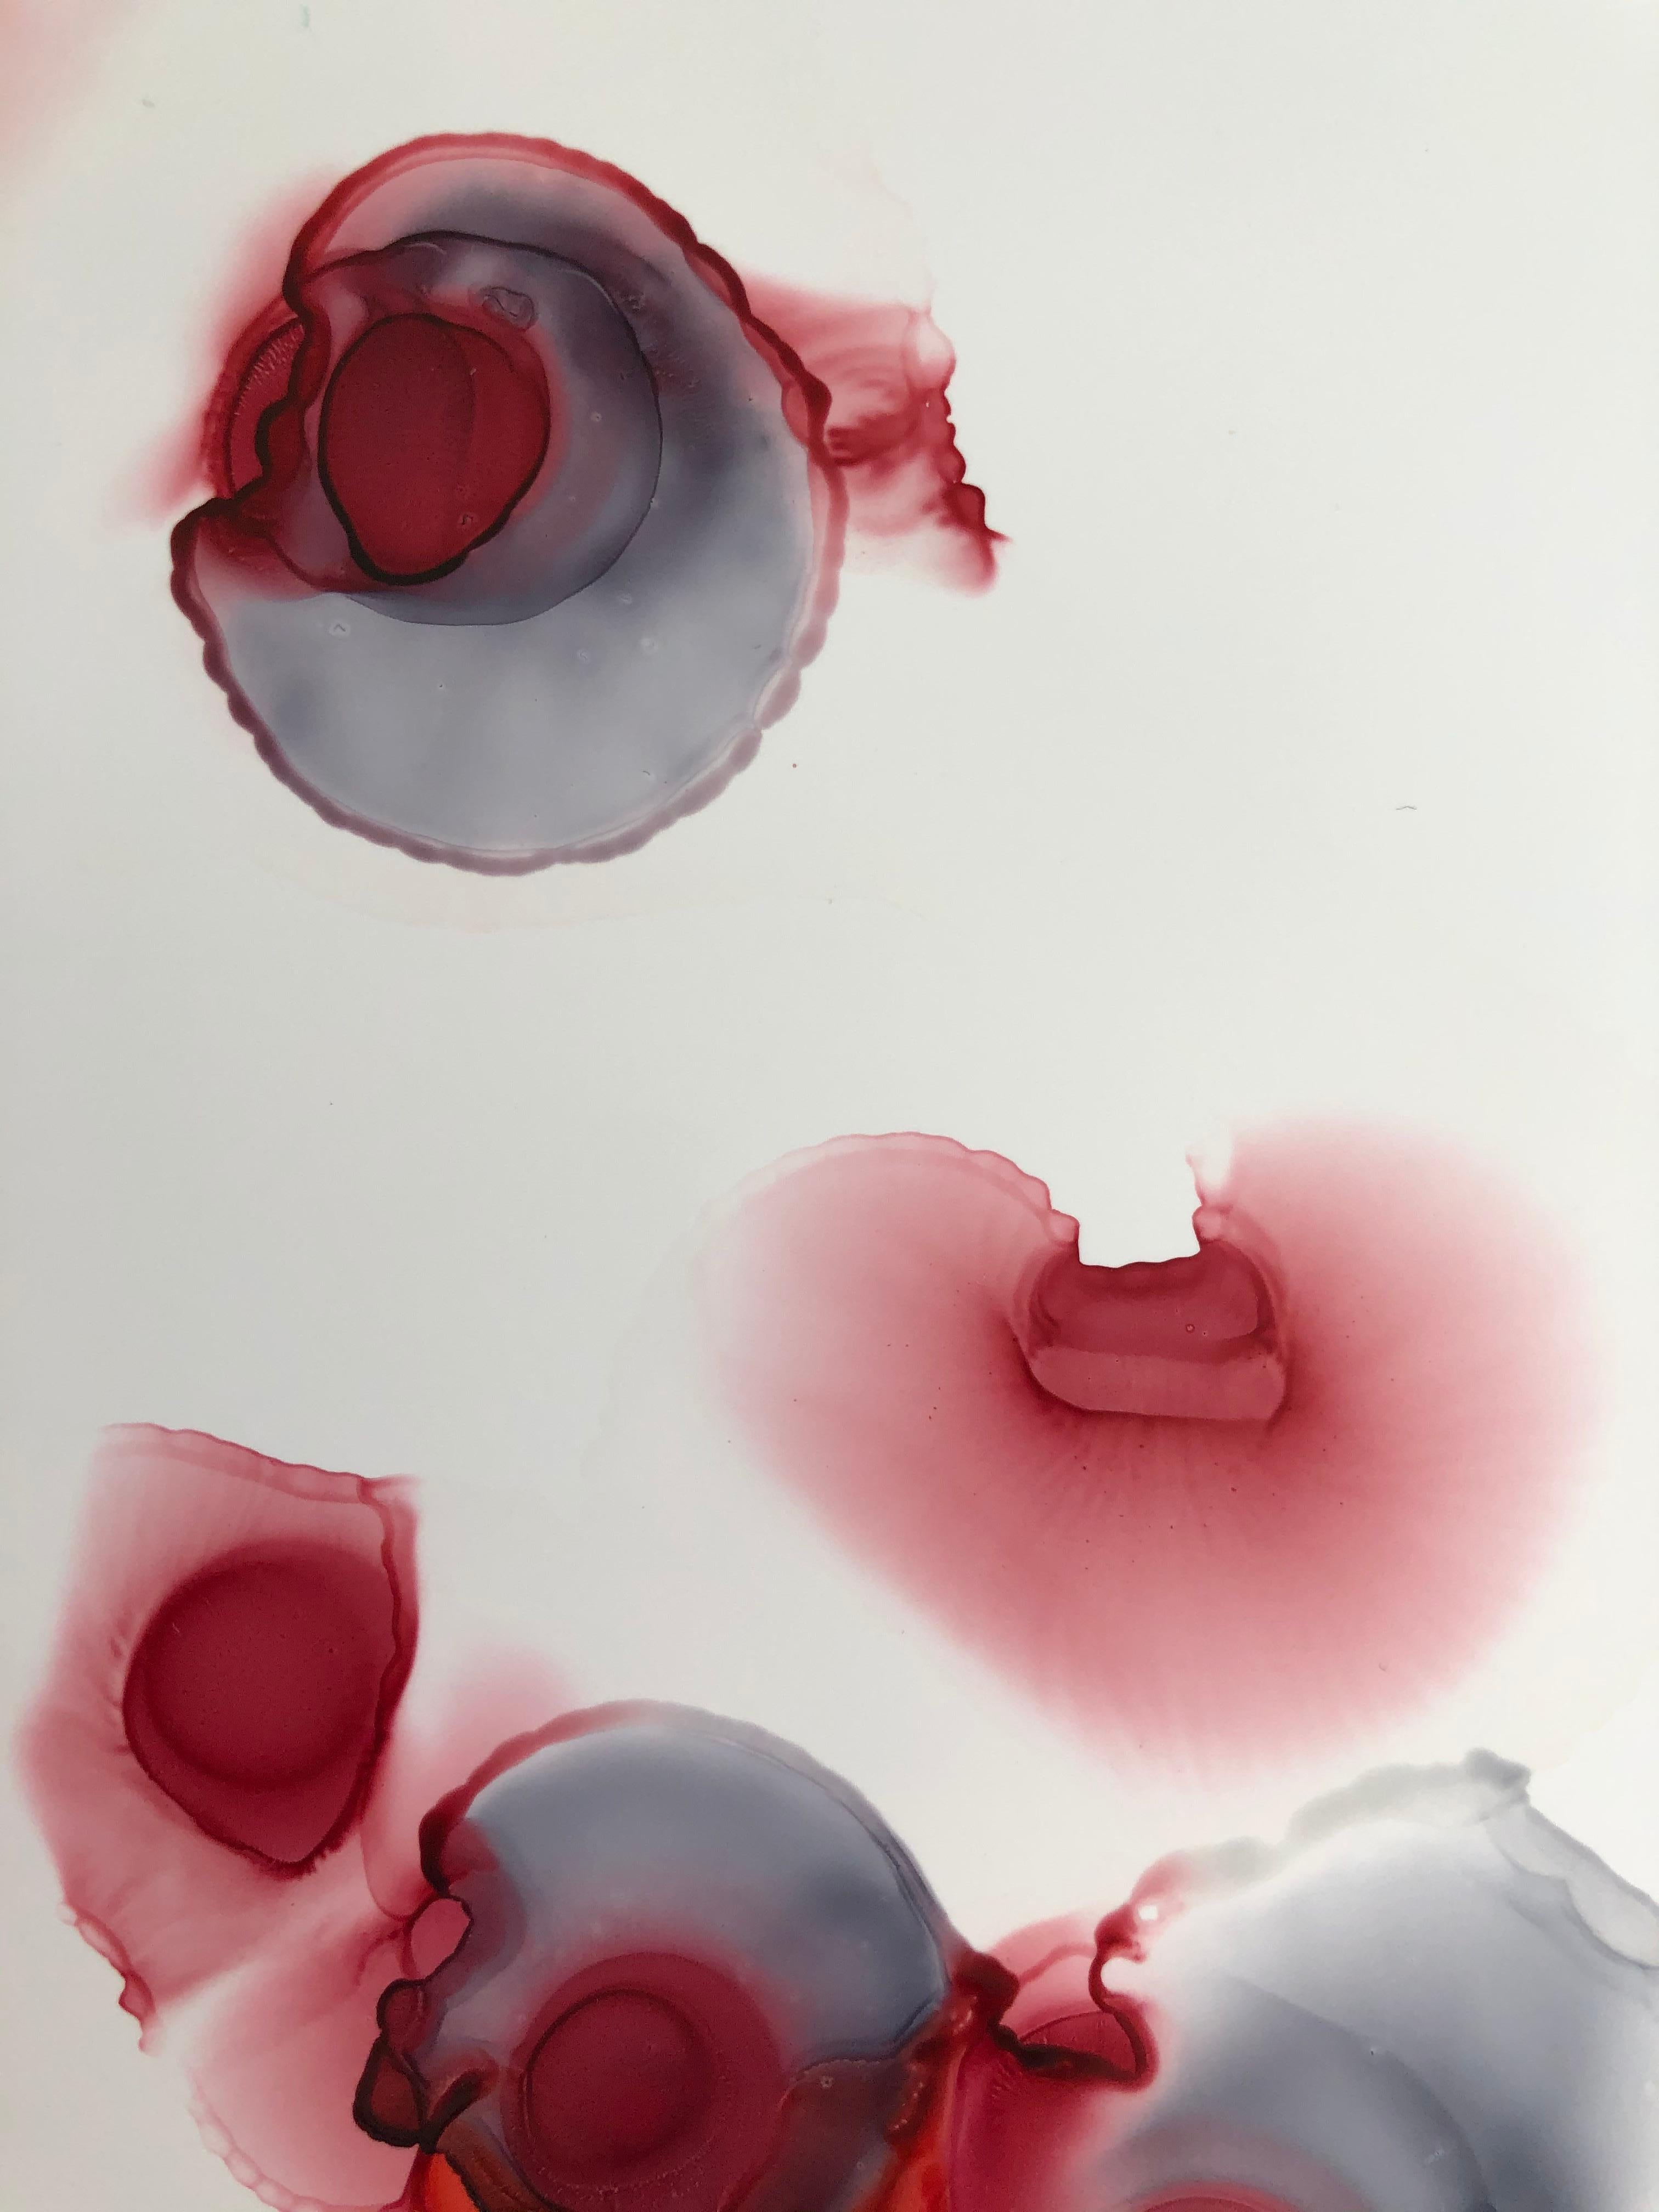 Singed roses - abstraction art, made in cherry red, garnet red, white, grey 1